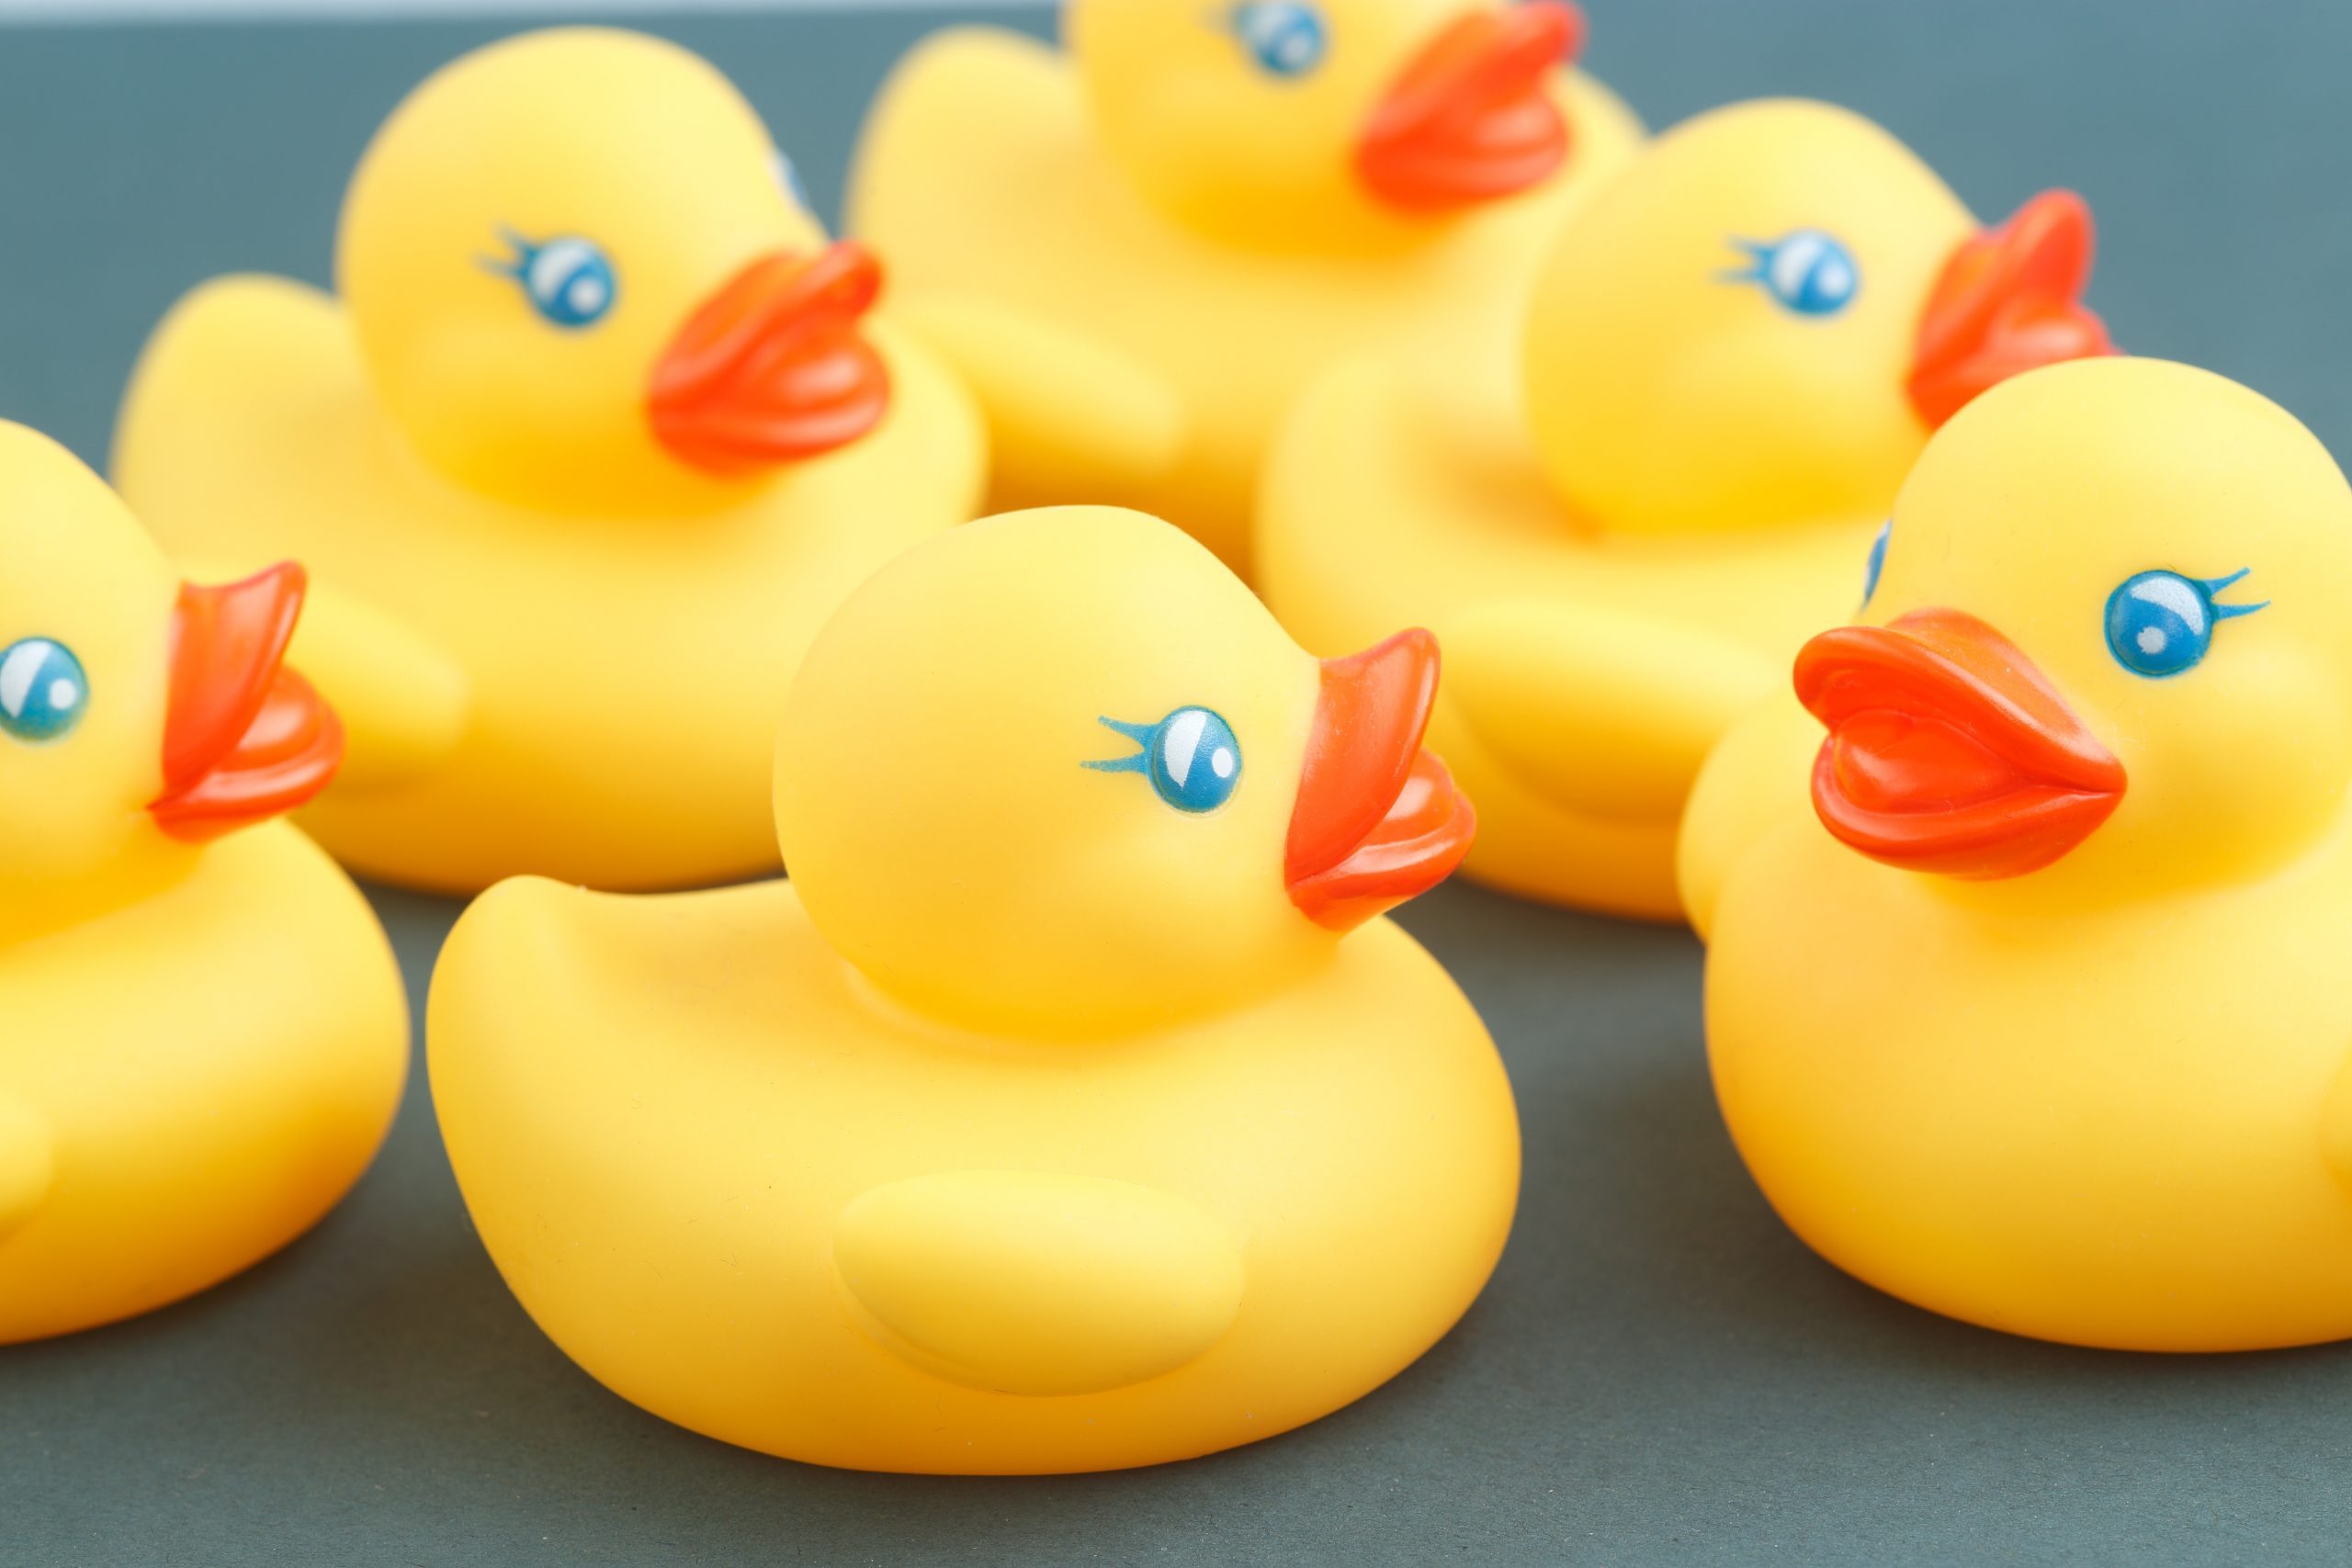 Yellow rubber ducks close up photography.